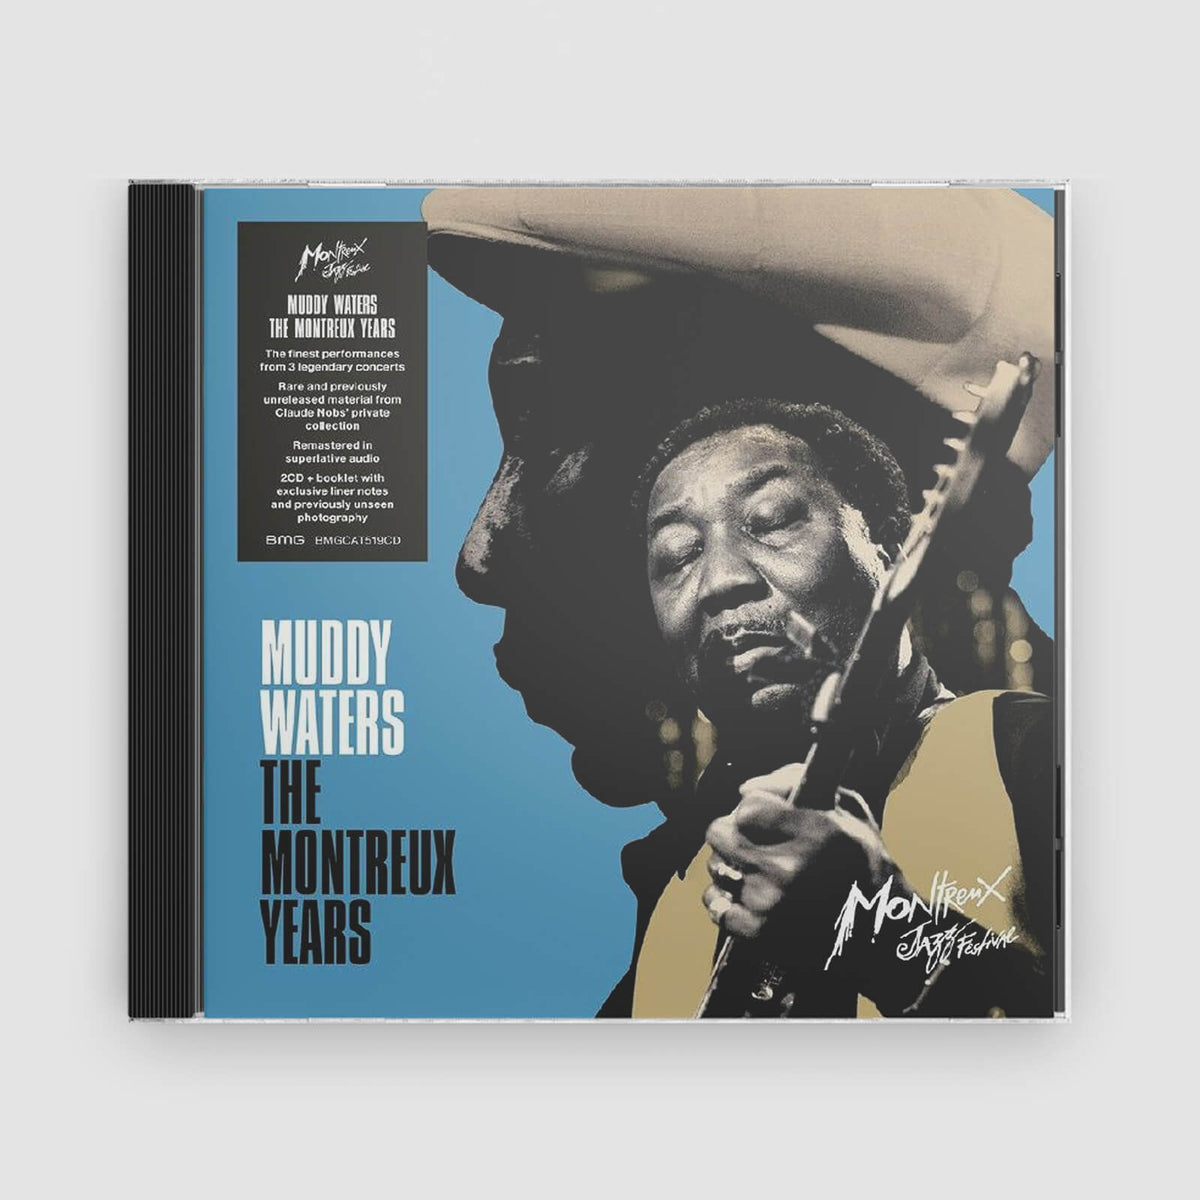 Muddy Waters : Muddy Waters - The Montreux Years